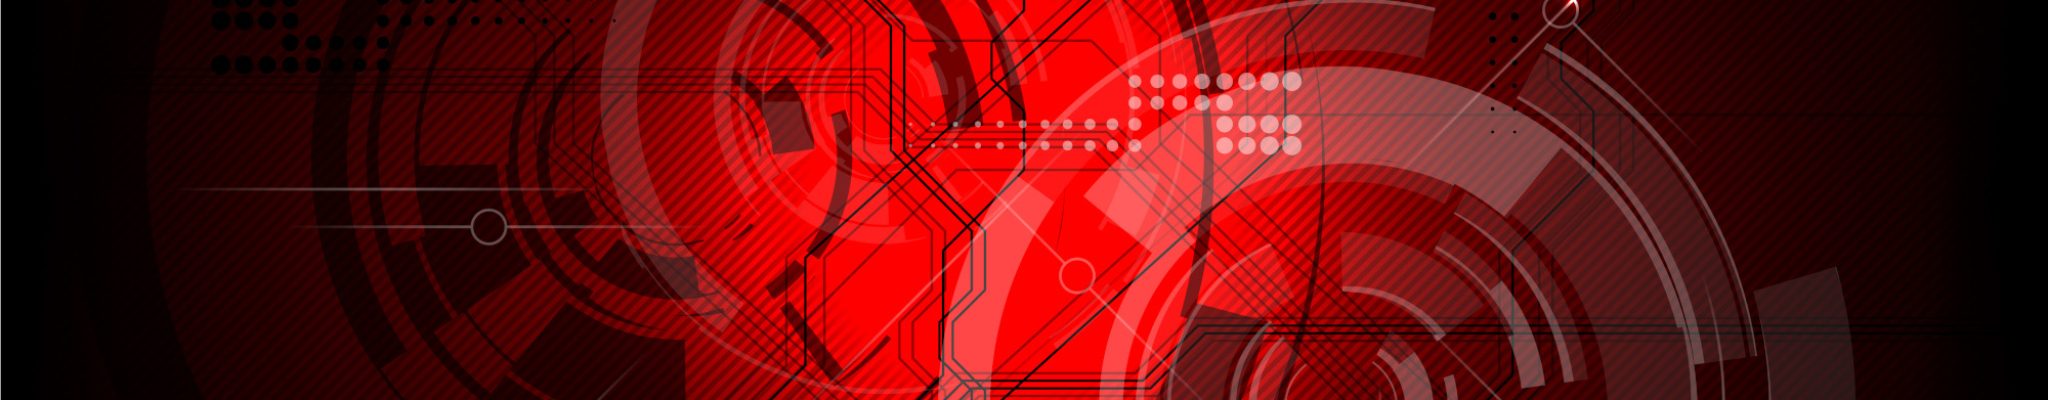 red and black technology background